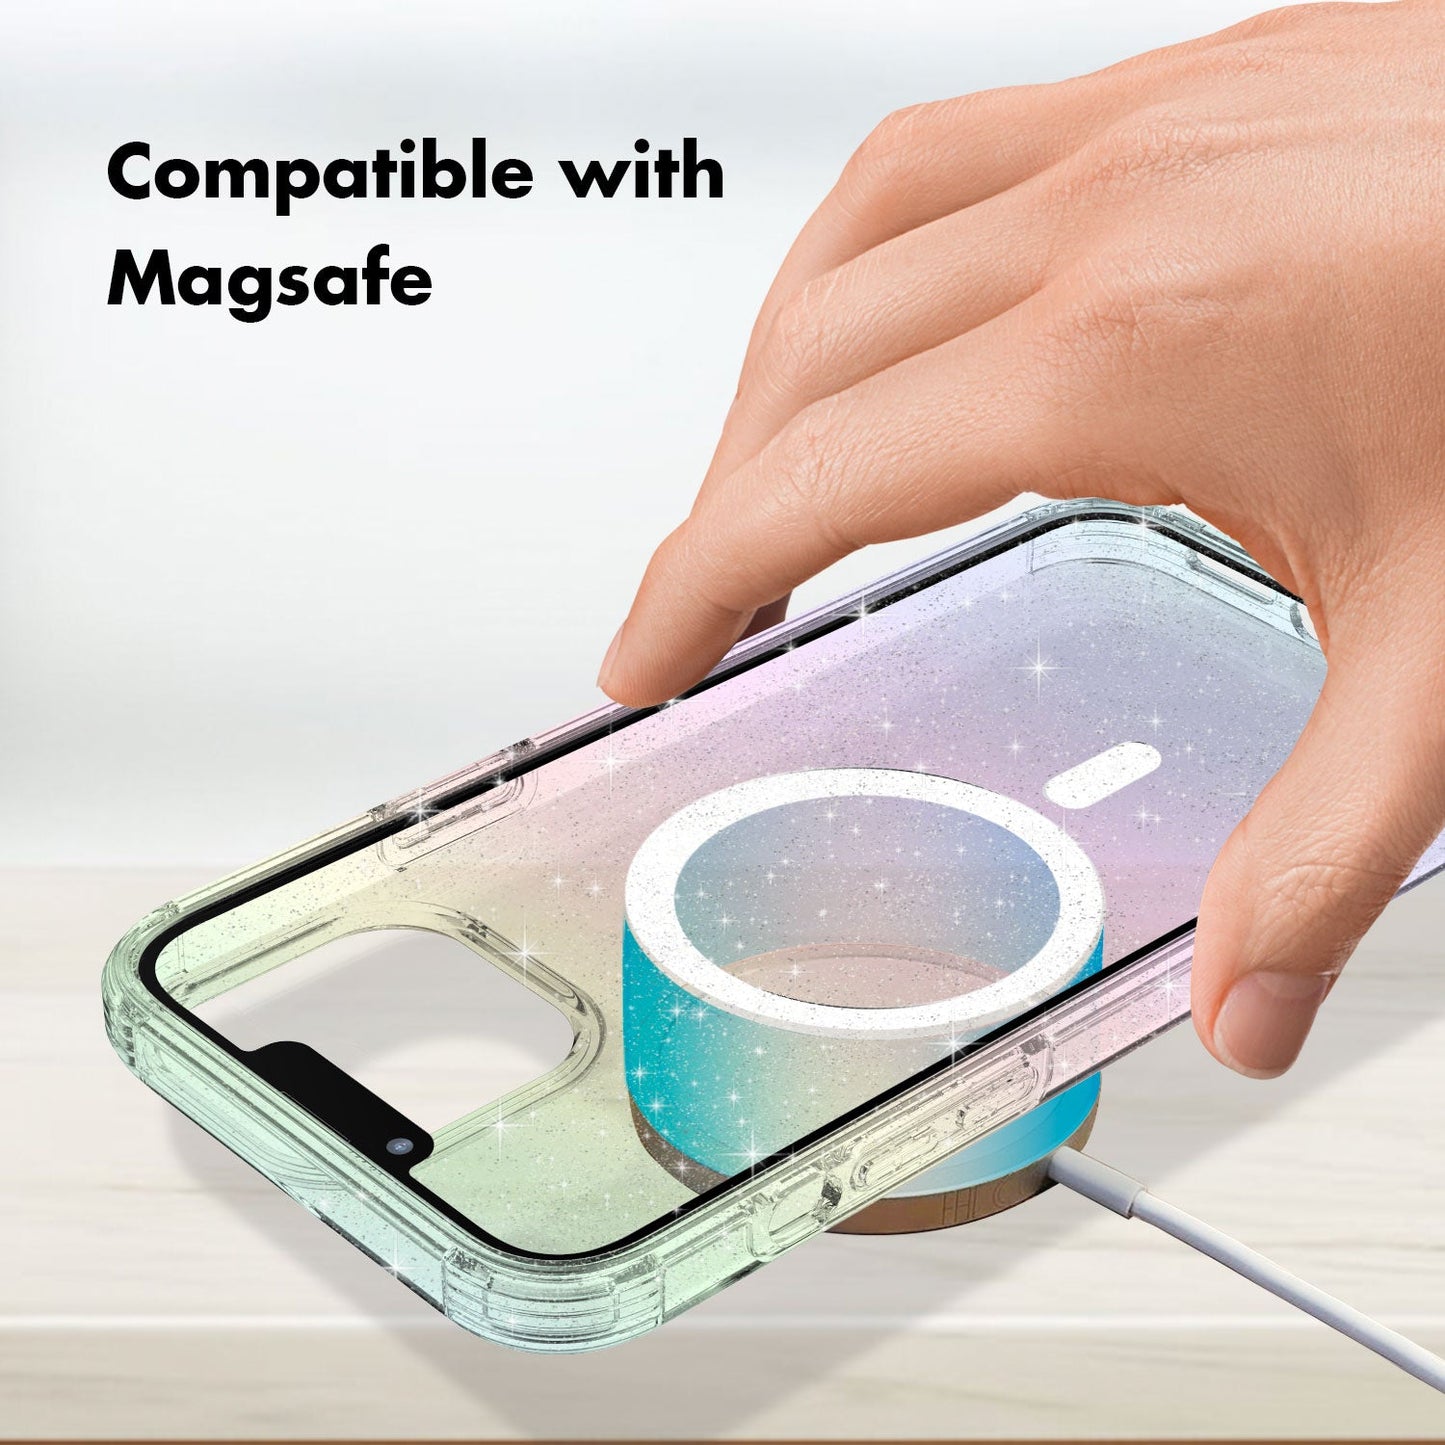 Tough On iPhone 13 Pro Max Case Glitter Iridescent with Magsafe